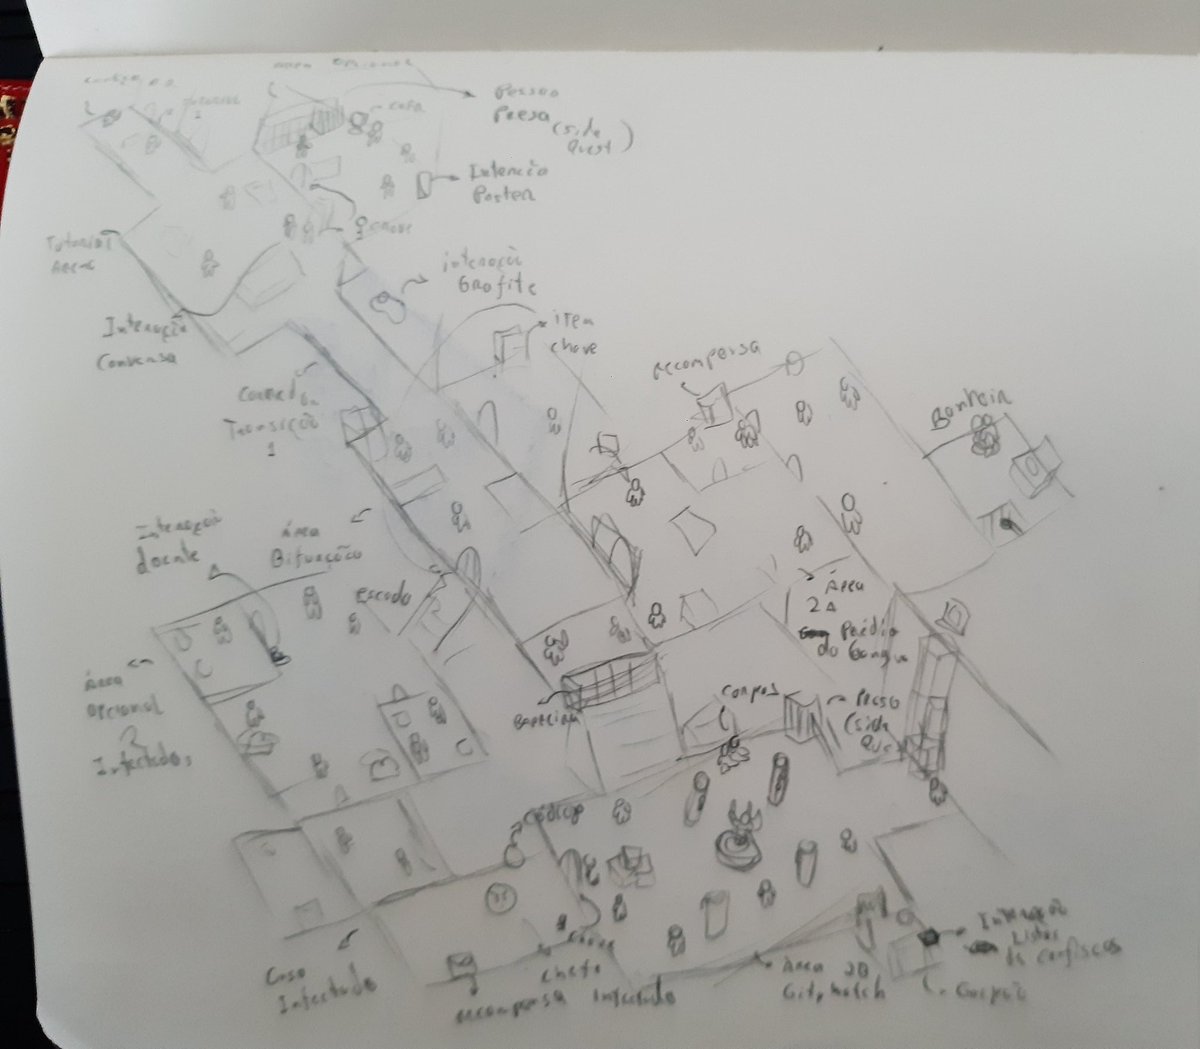 Level Design is my passion (for real)
Map for the City Noire demo, not final, there is more to add but already seeing things to change.
#gamedesign